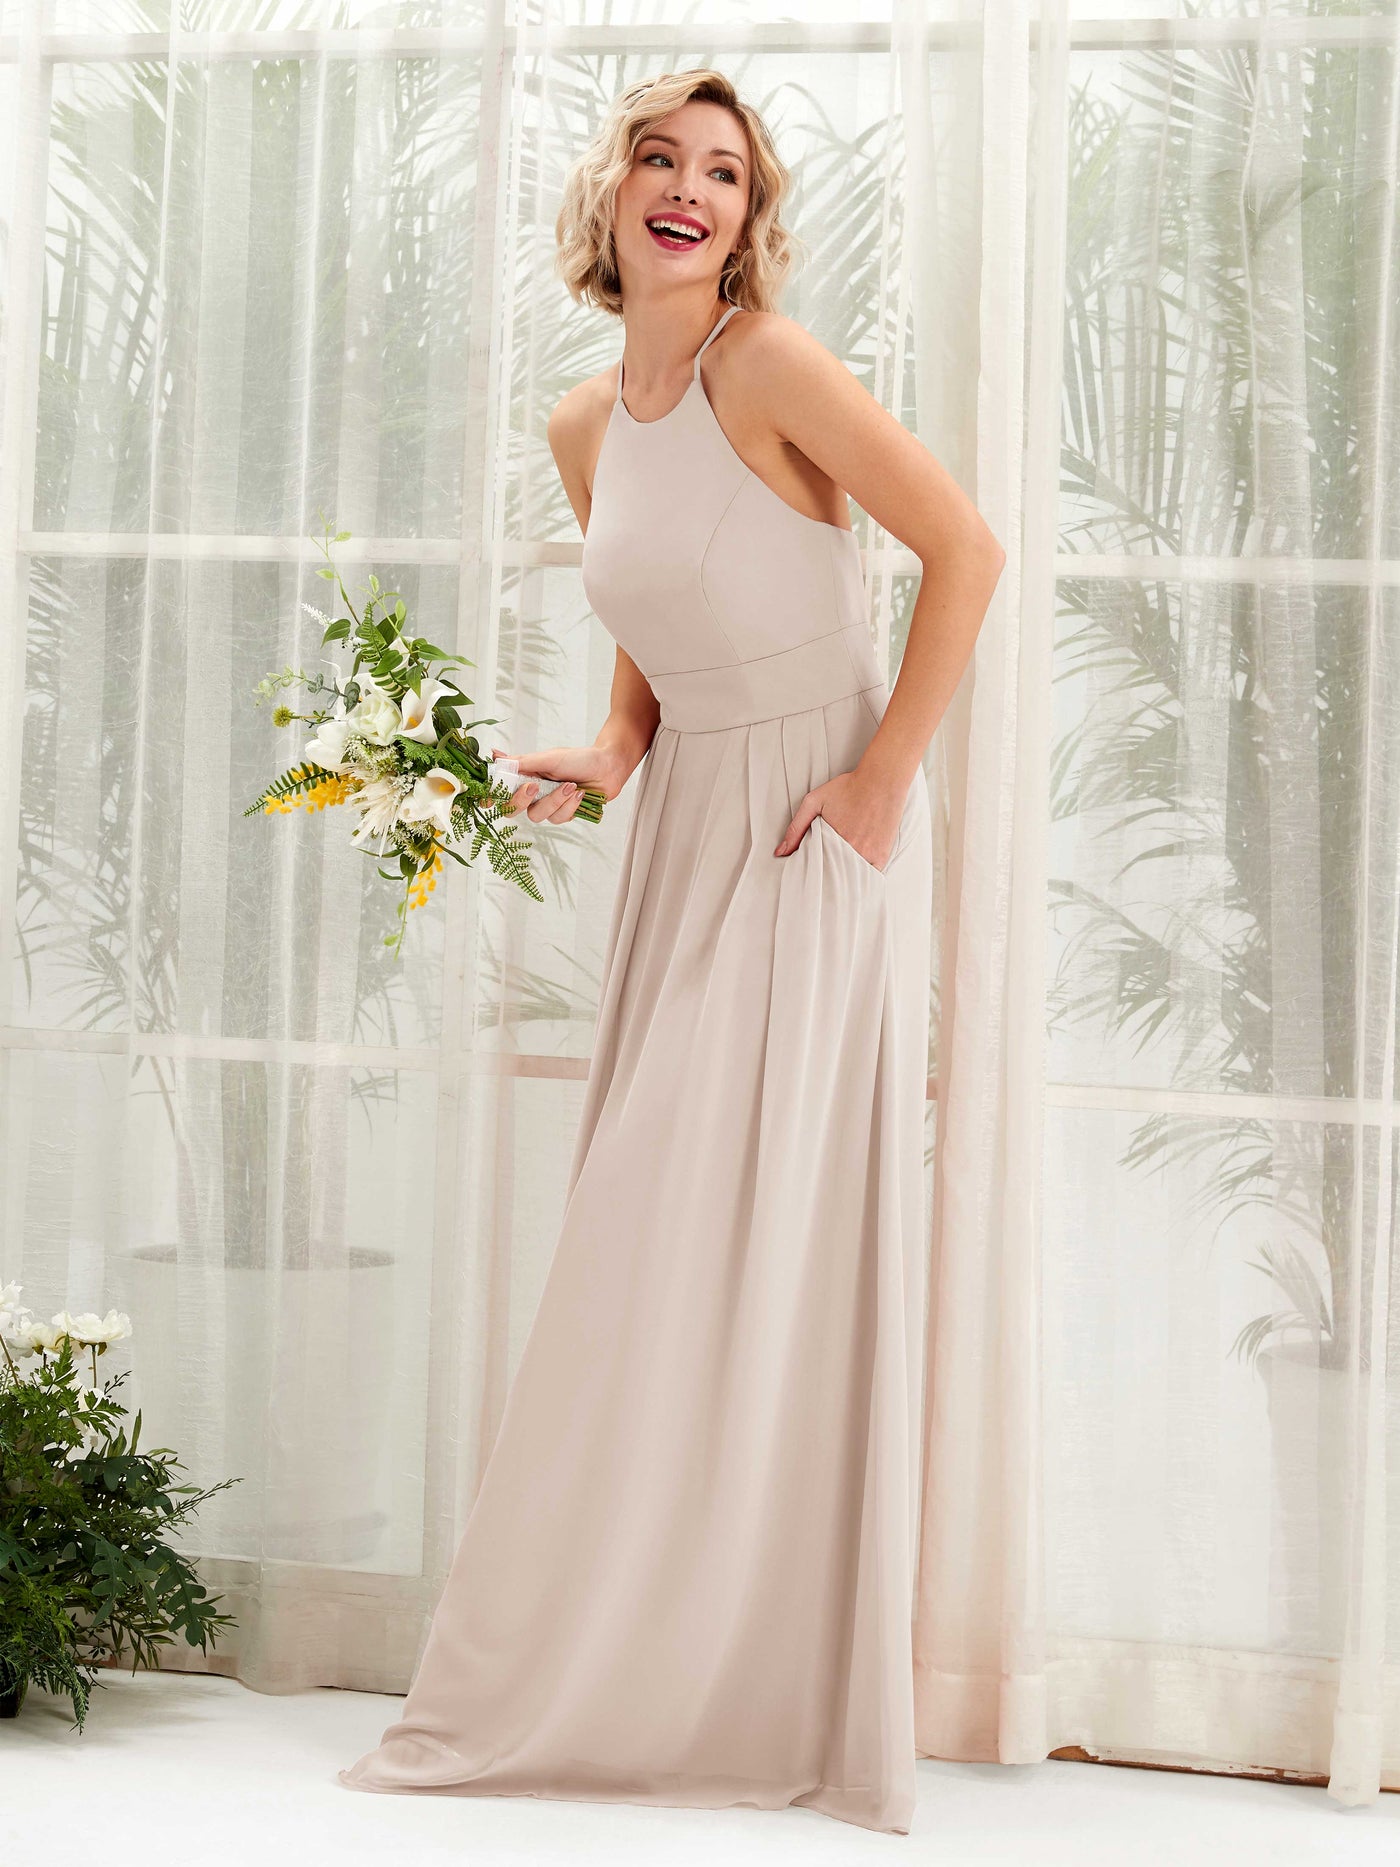 Champagne Bridesmaid Dresses Bridesmaid Dress A-line Chiffon Halter Full Length Sleeveless Wedding Party Dress (81225216)#color_champagne